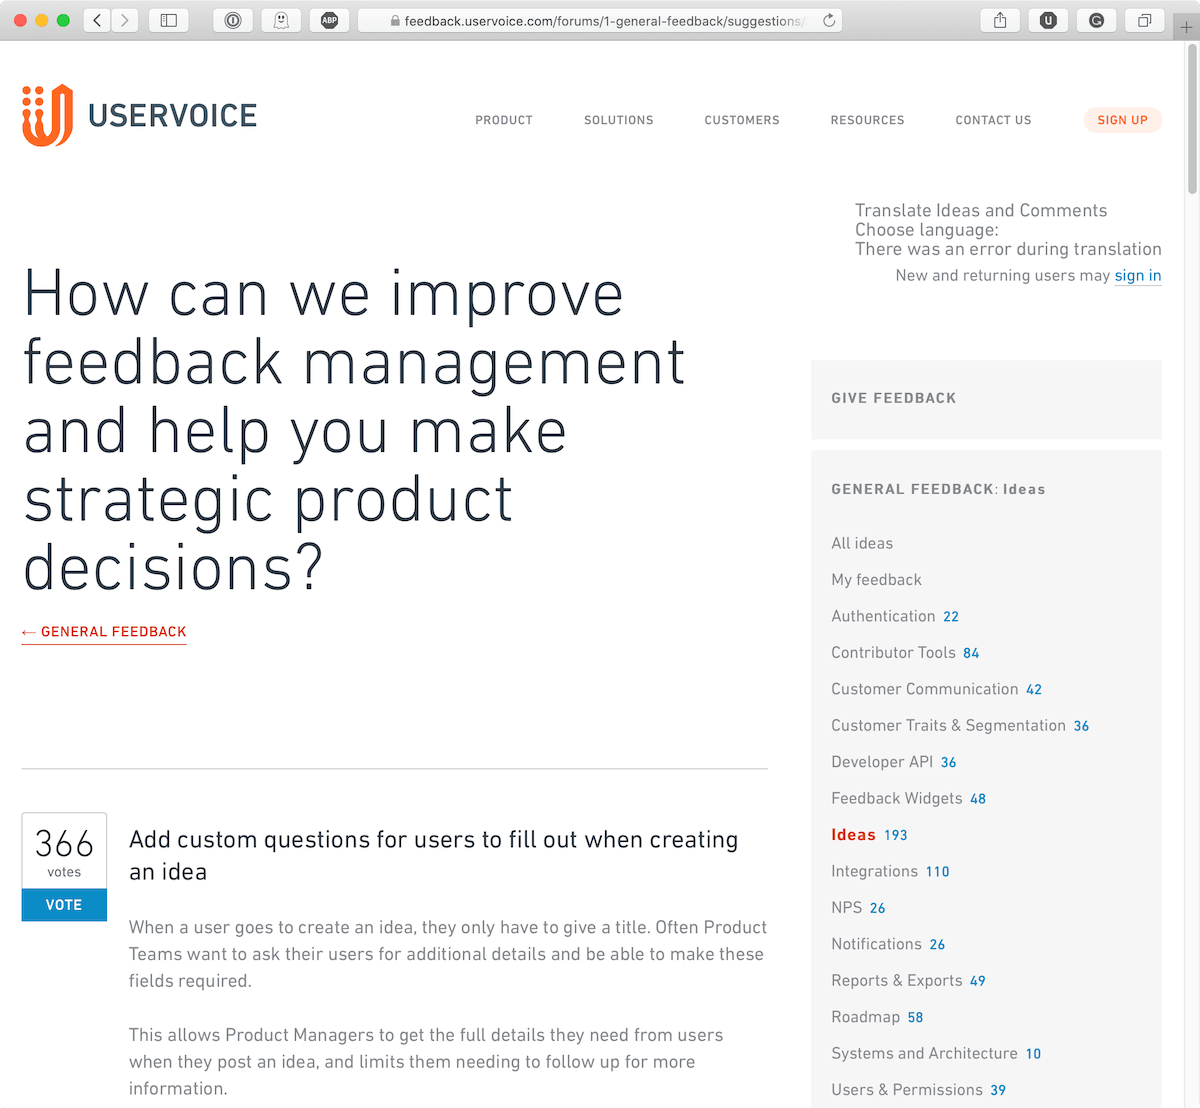 productroad is uservoice alternative - post